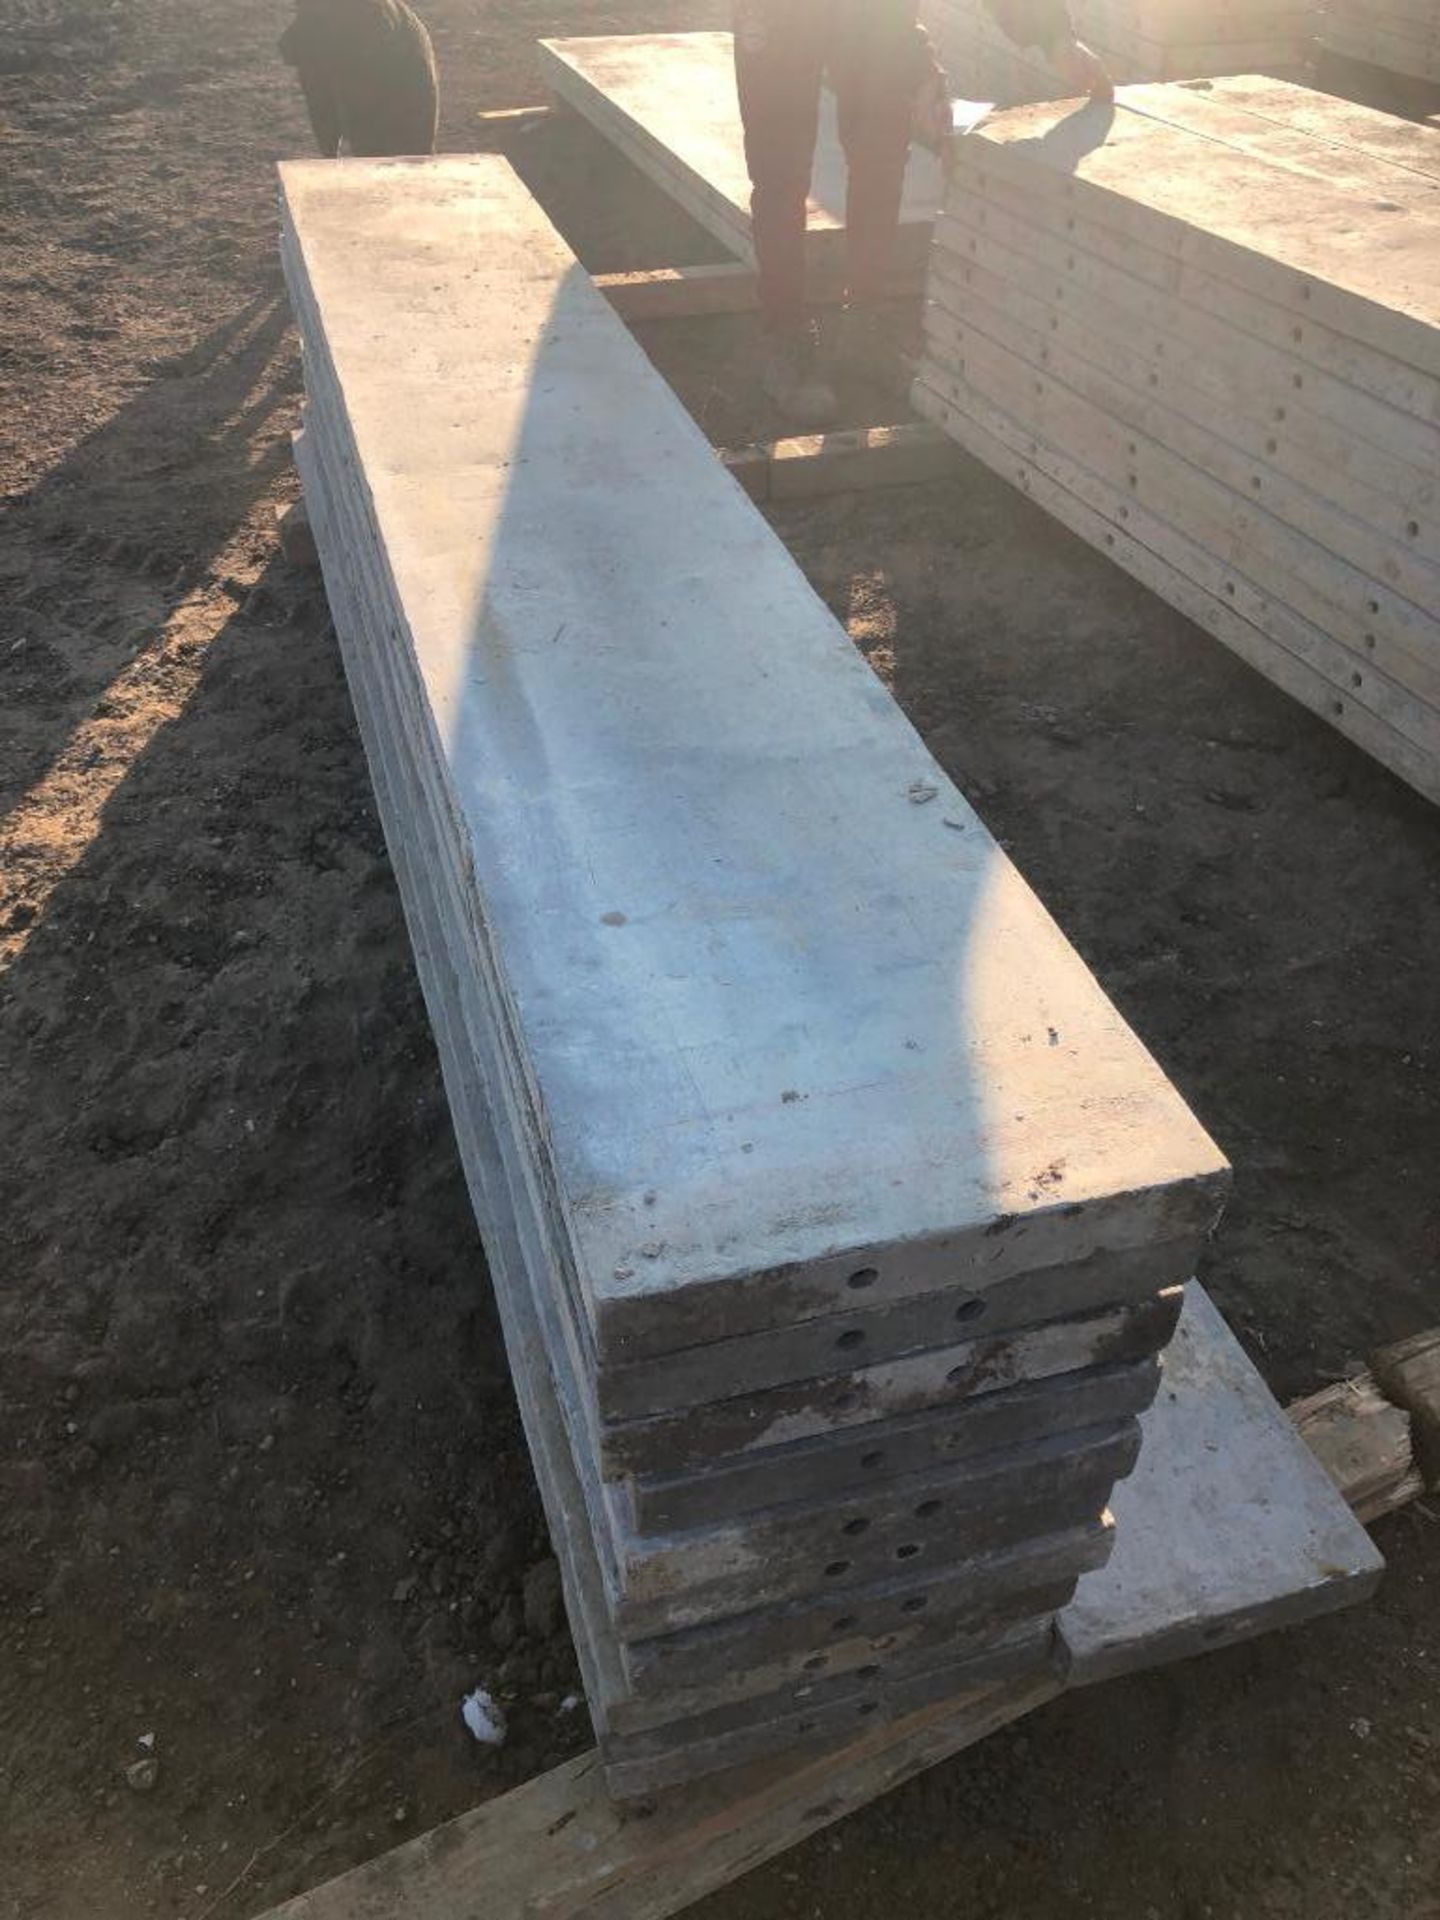 (10) 15" x 8' Western Aluminum Concrete Forms, Smooth 6-12 Hole Pattern, Located in Naperville, IL - Image 2 of 3